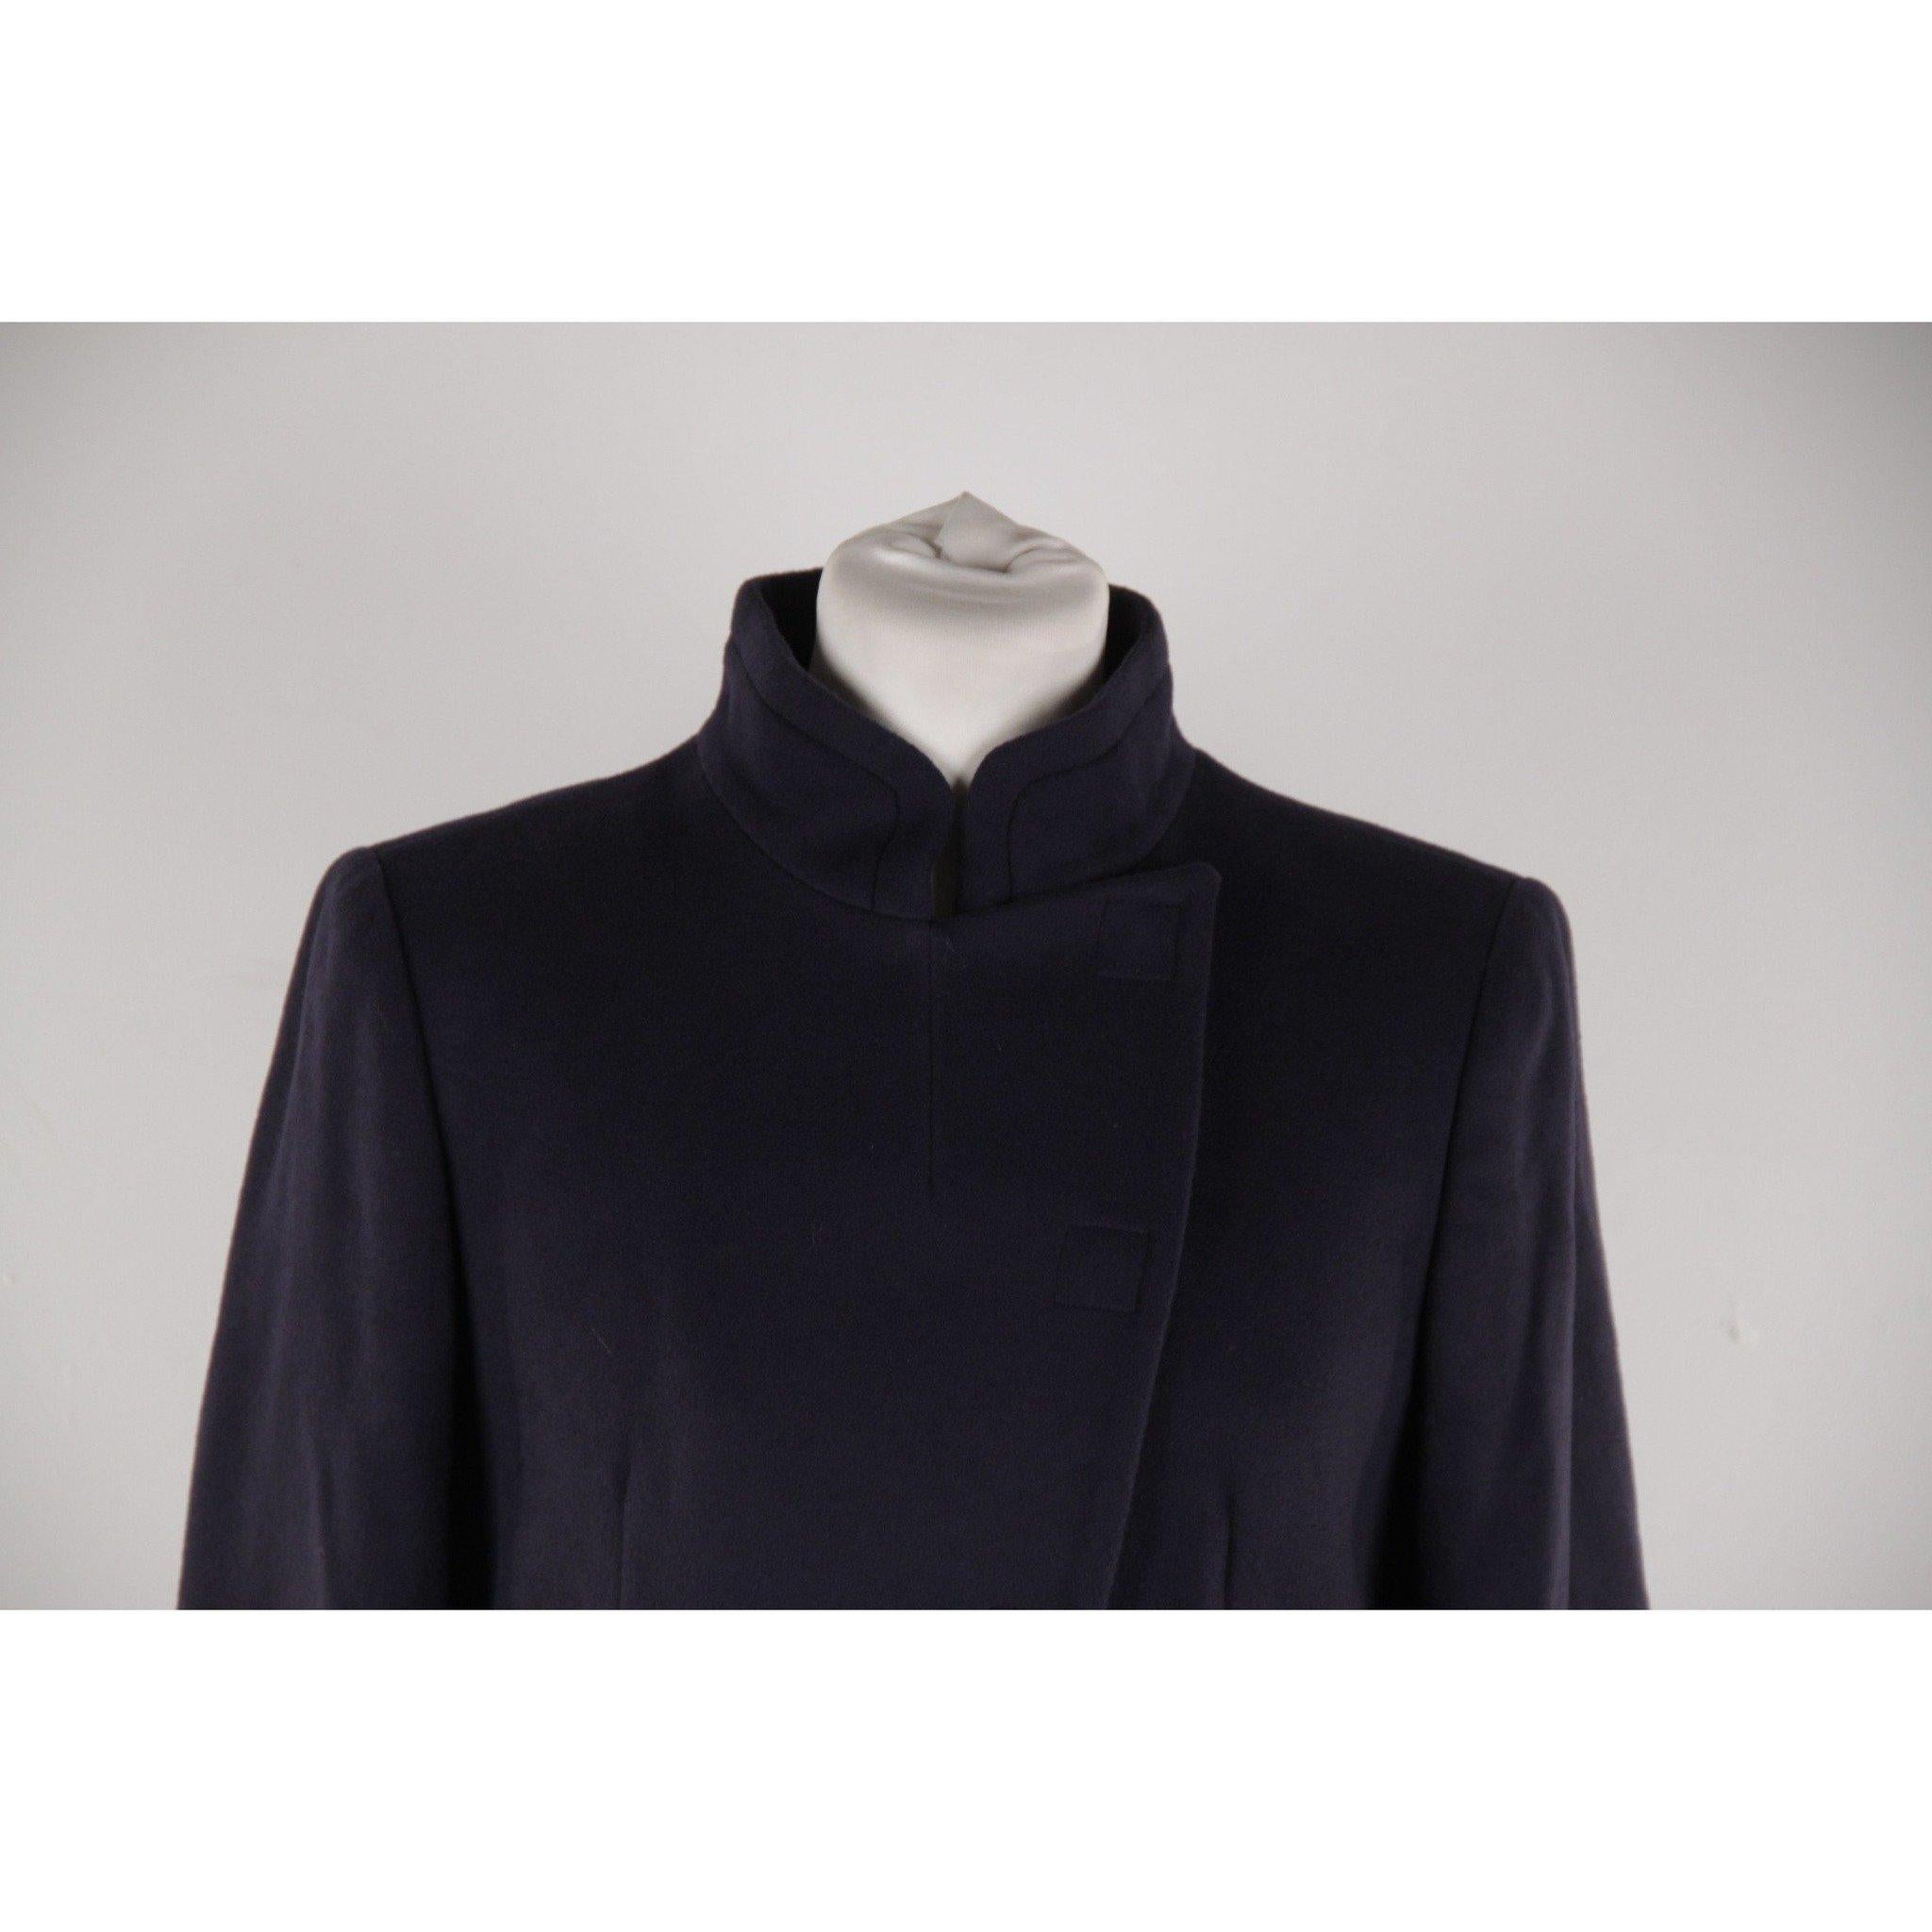 MATERIAL: Wool COLOR: Blue MODEL: Coat GENDER: Women SIZE: 40 IT COUNTRY OF MANUFACTURE: Italy Condition CONDITION DETAILS: VERY GOOD~ Previously worn with moderate wash wear/fade and or minor visible flaw(s)* DETAILS. Gently used! Some light